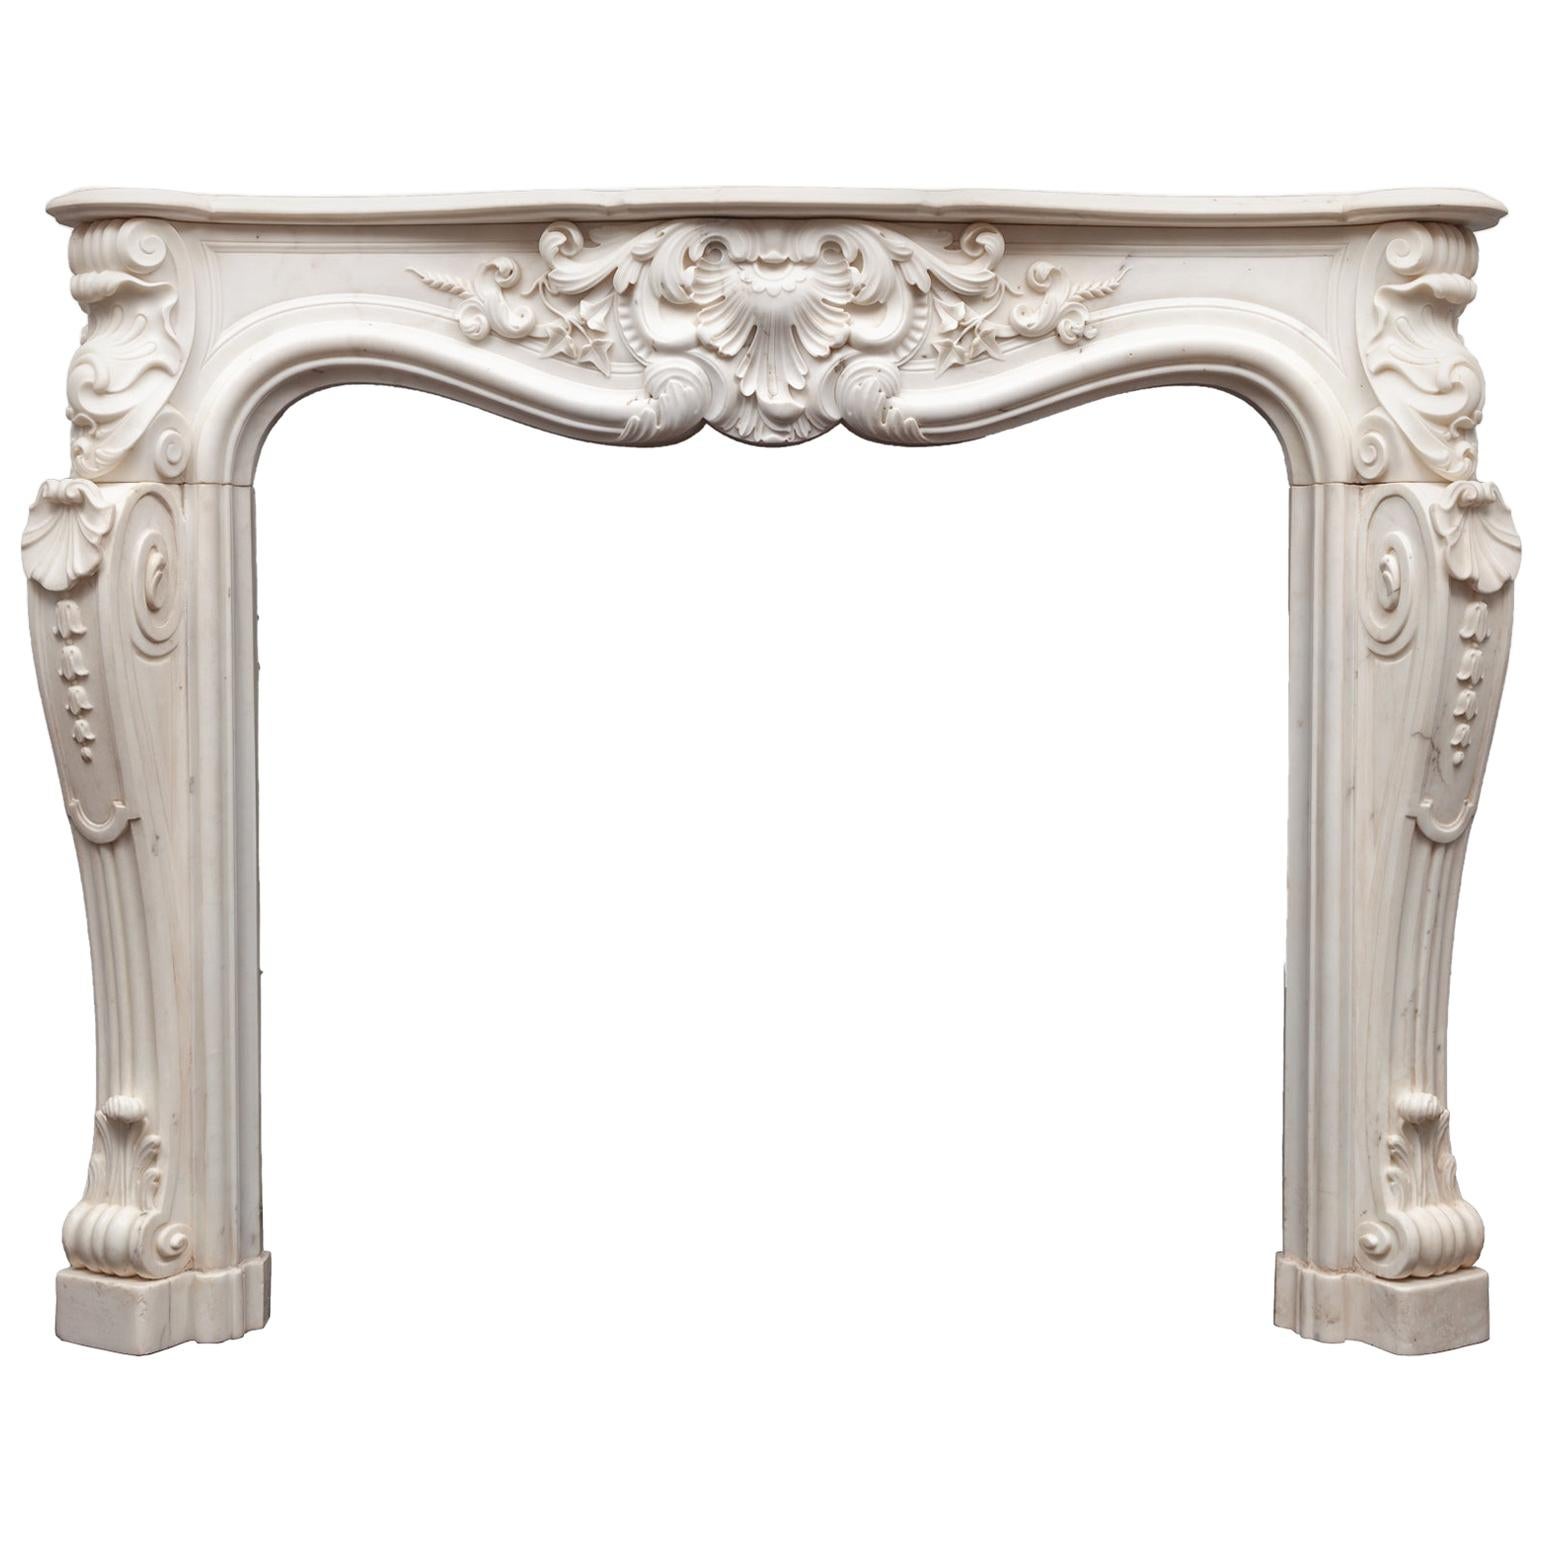 Antique Rococo Style Statuary Marble Mantel